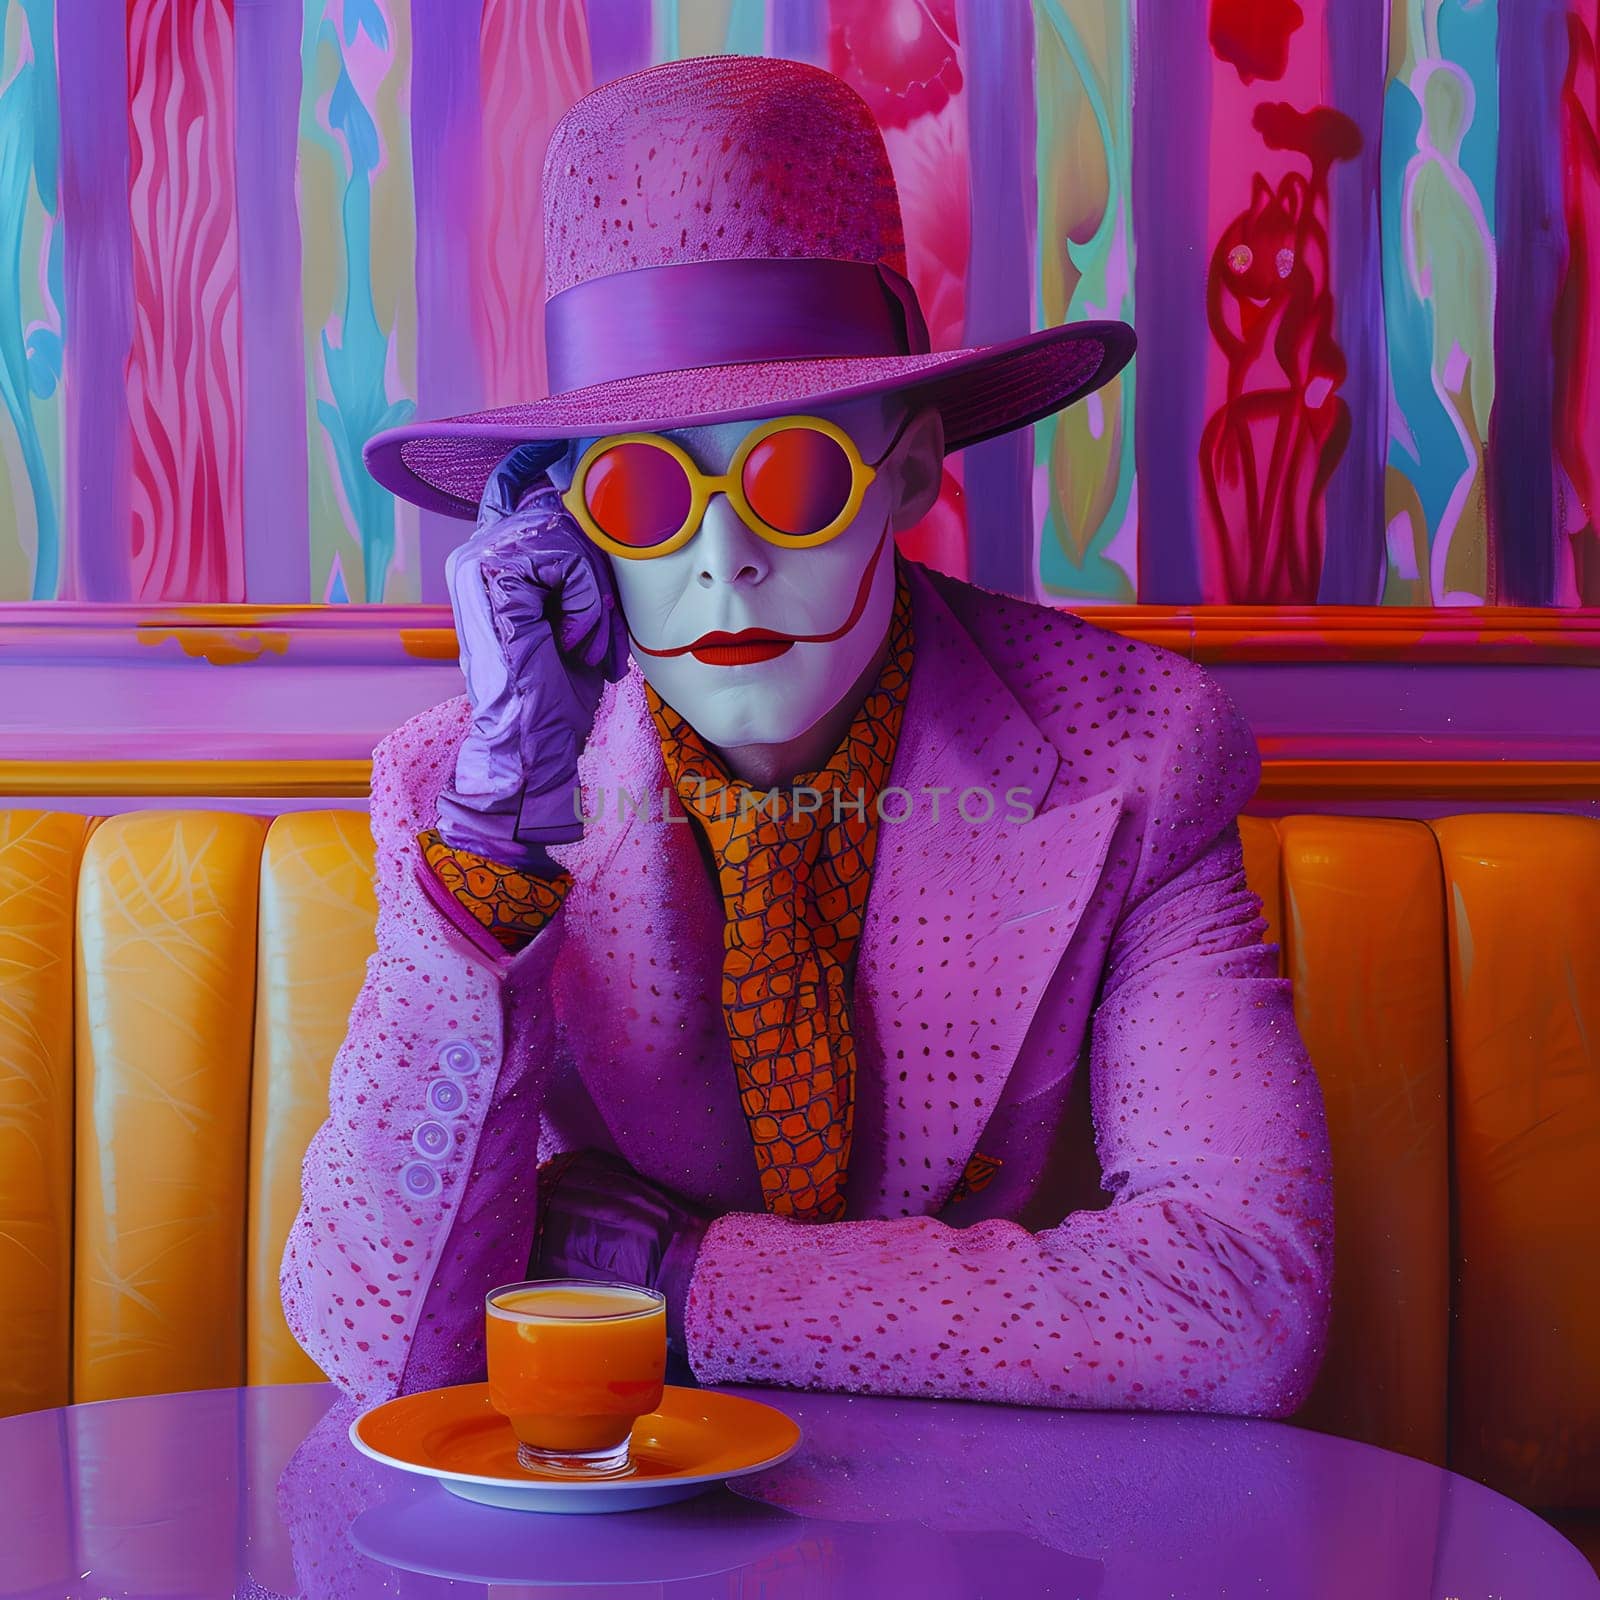 A man in a violet suit and a sun hat sits at a table with a cup of coffee. The Tableware is set up nicely with Serveware. His Costume hat adds a touch of entertainment to the scene